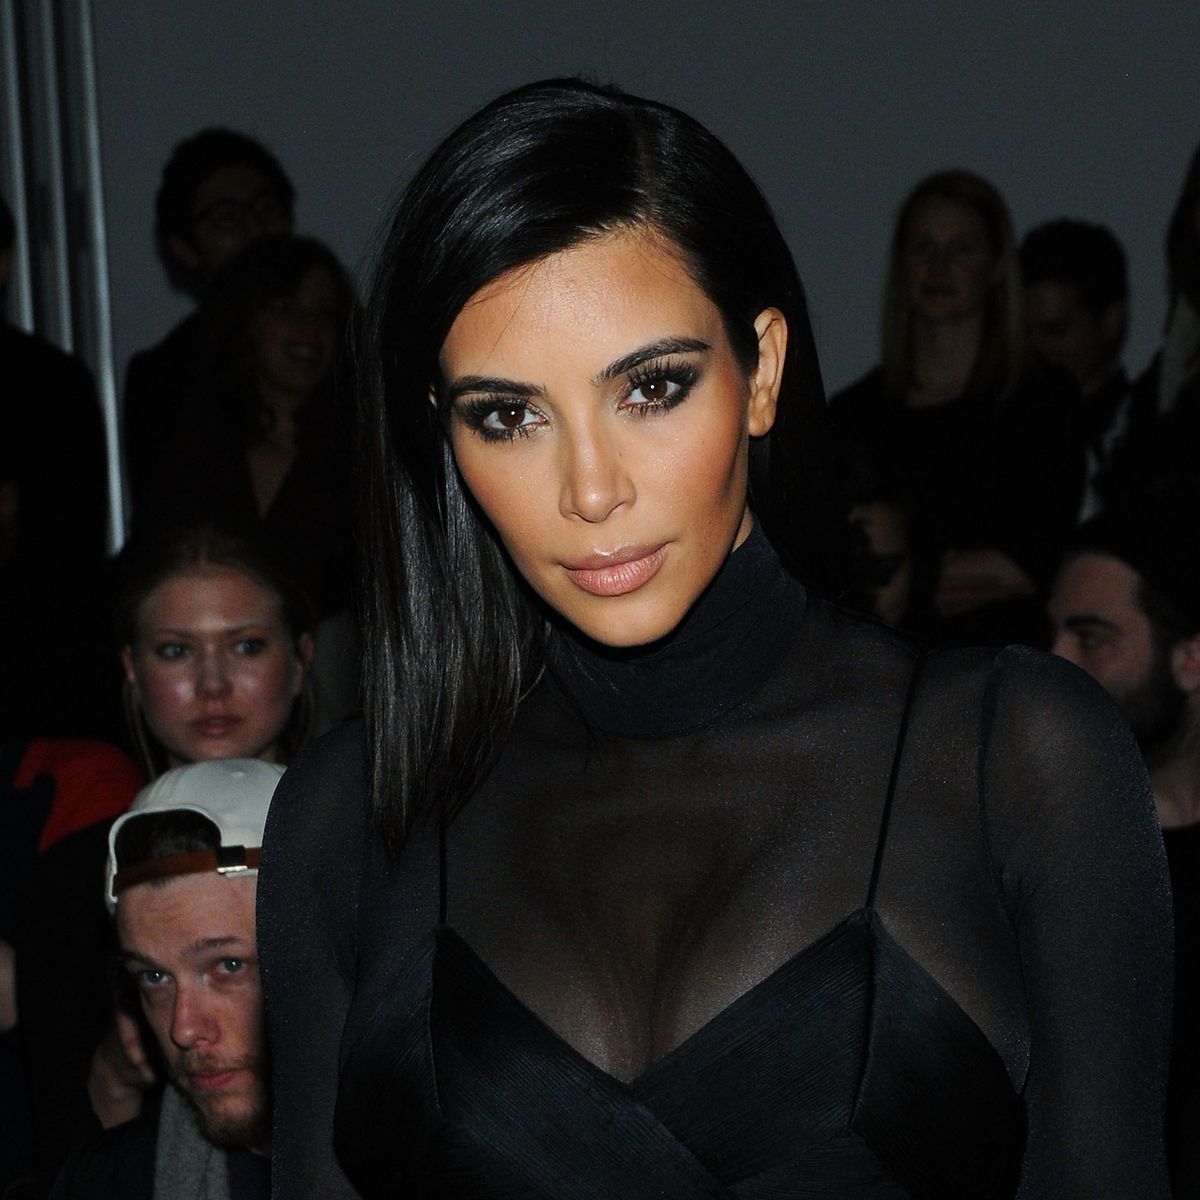 If These Teasers Are to Be Believed, Kim Kardashian Might Be Getting a Hysterectomy